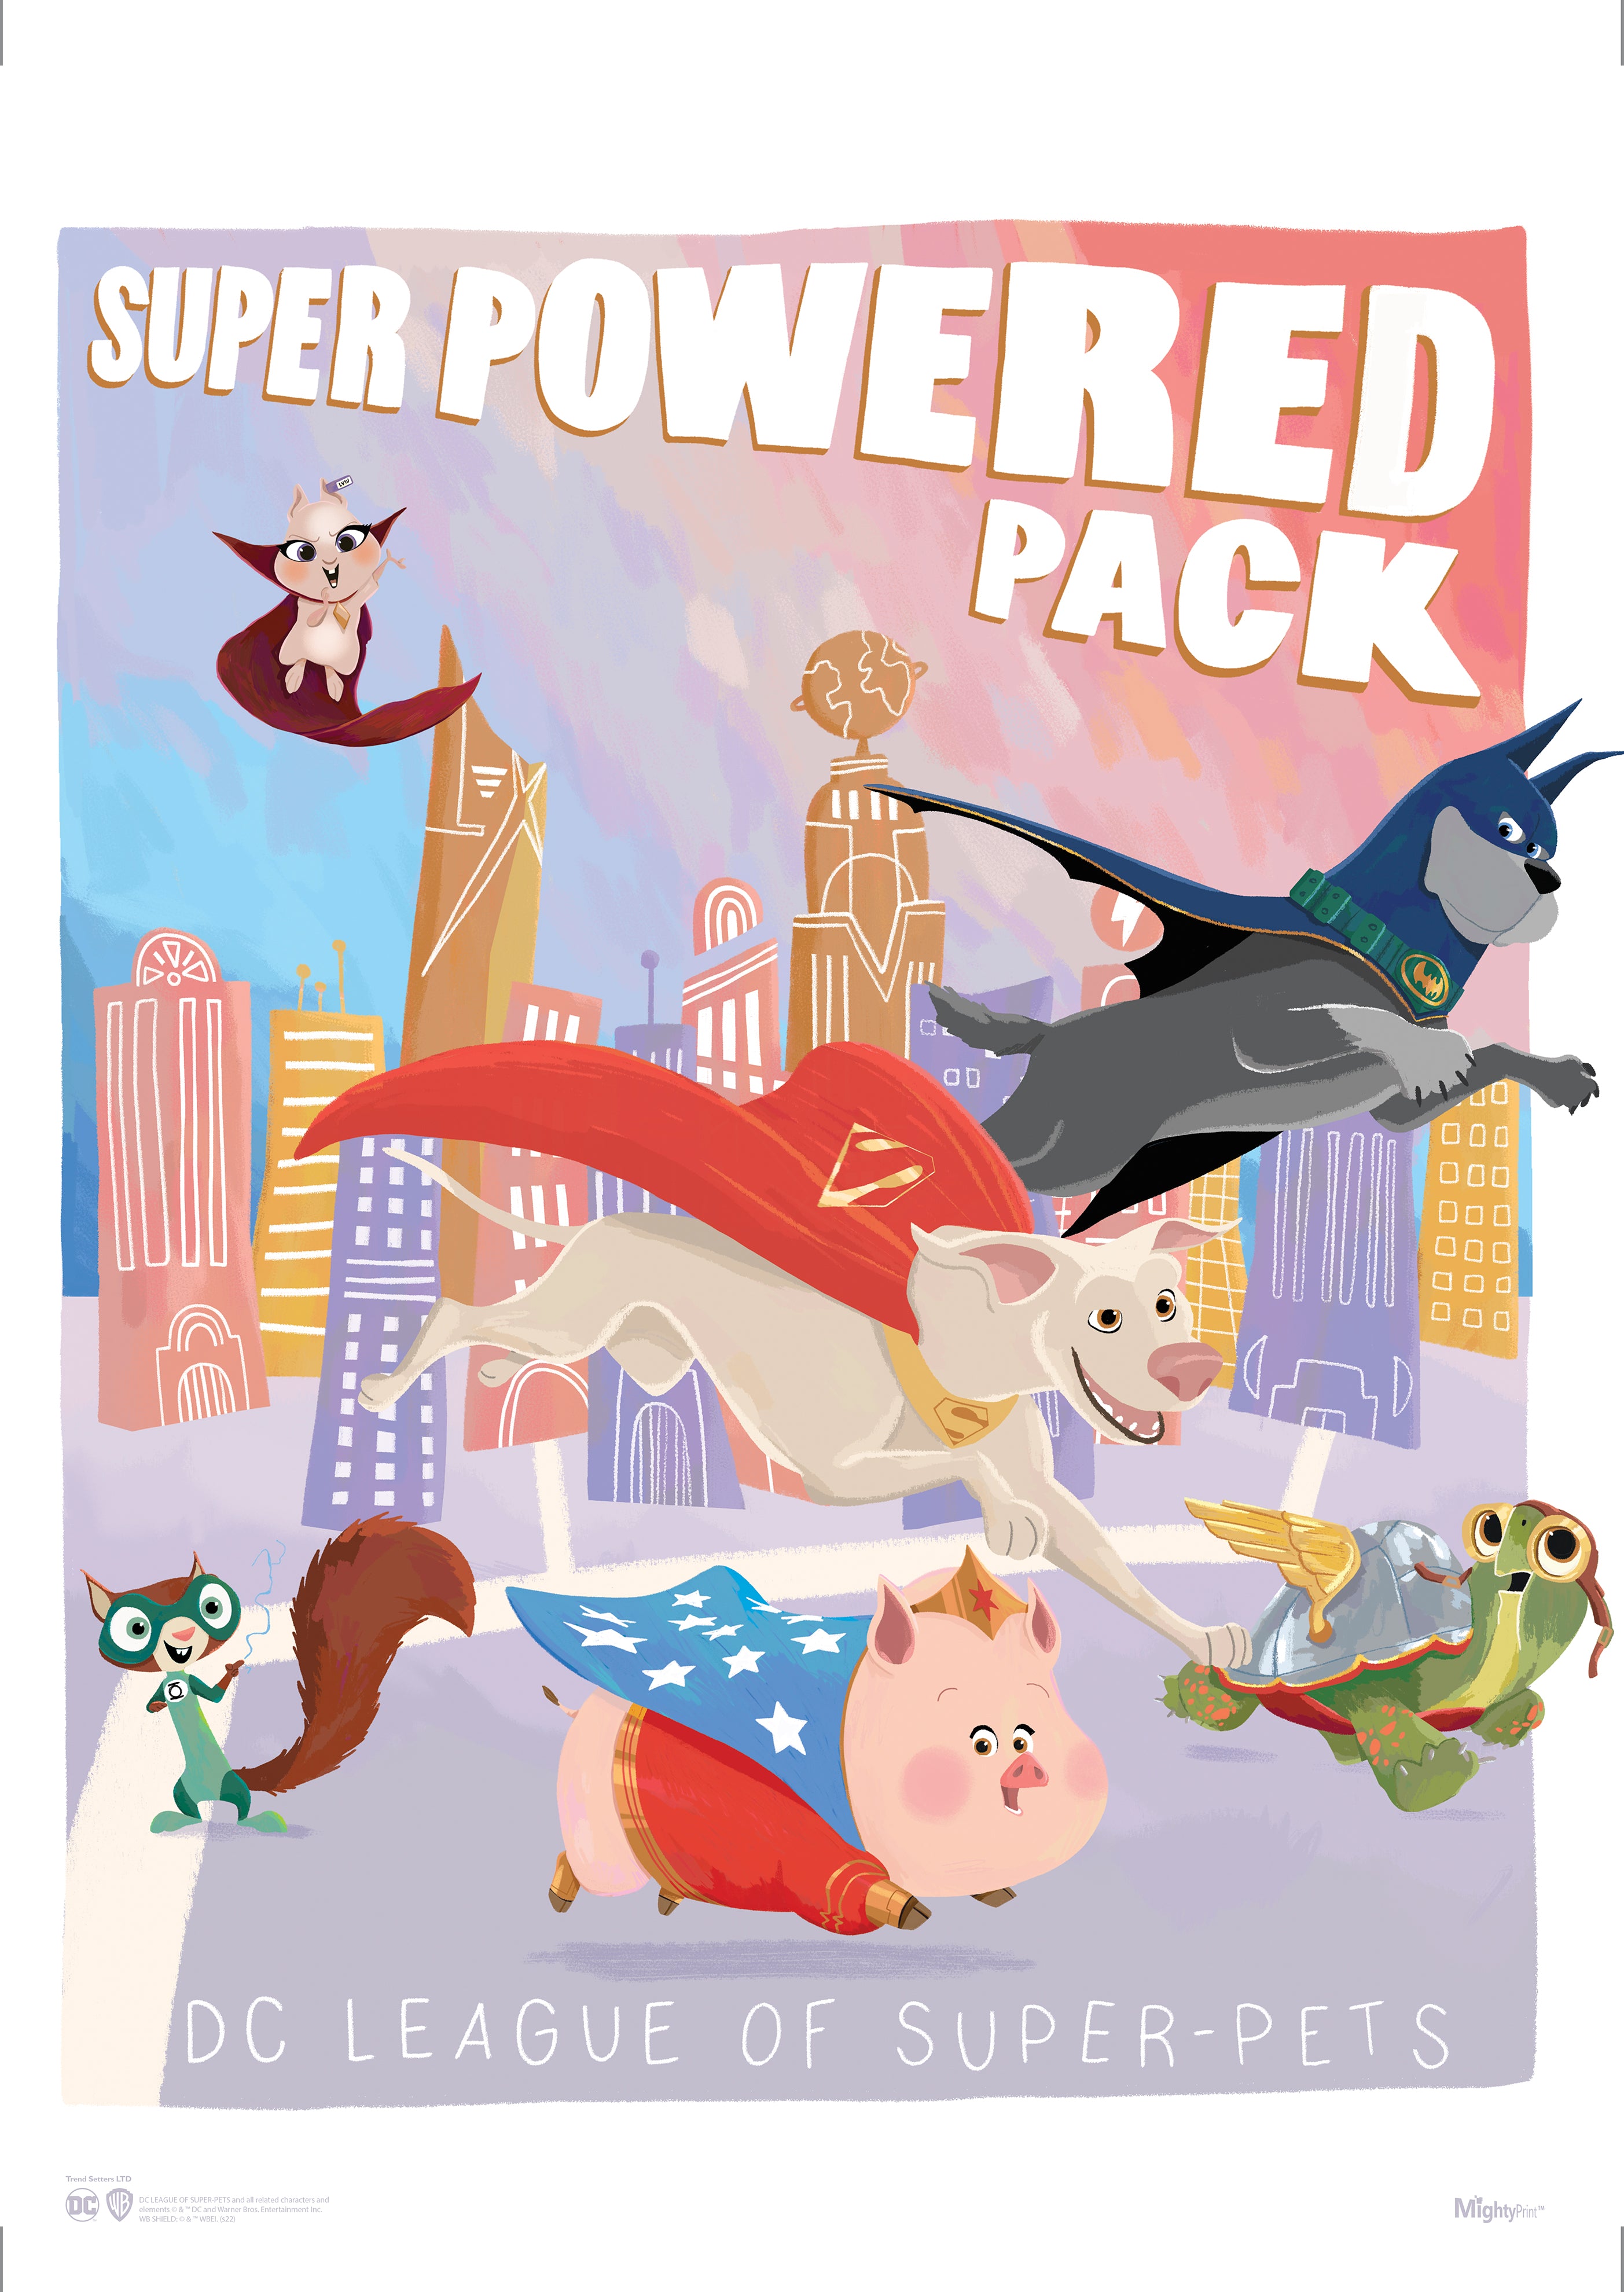 DC League of Super-Pets (Super Powered Pack) MightyPrint™ Wall Art MP17240738